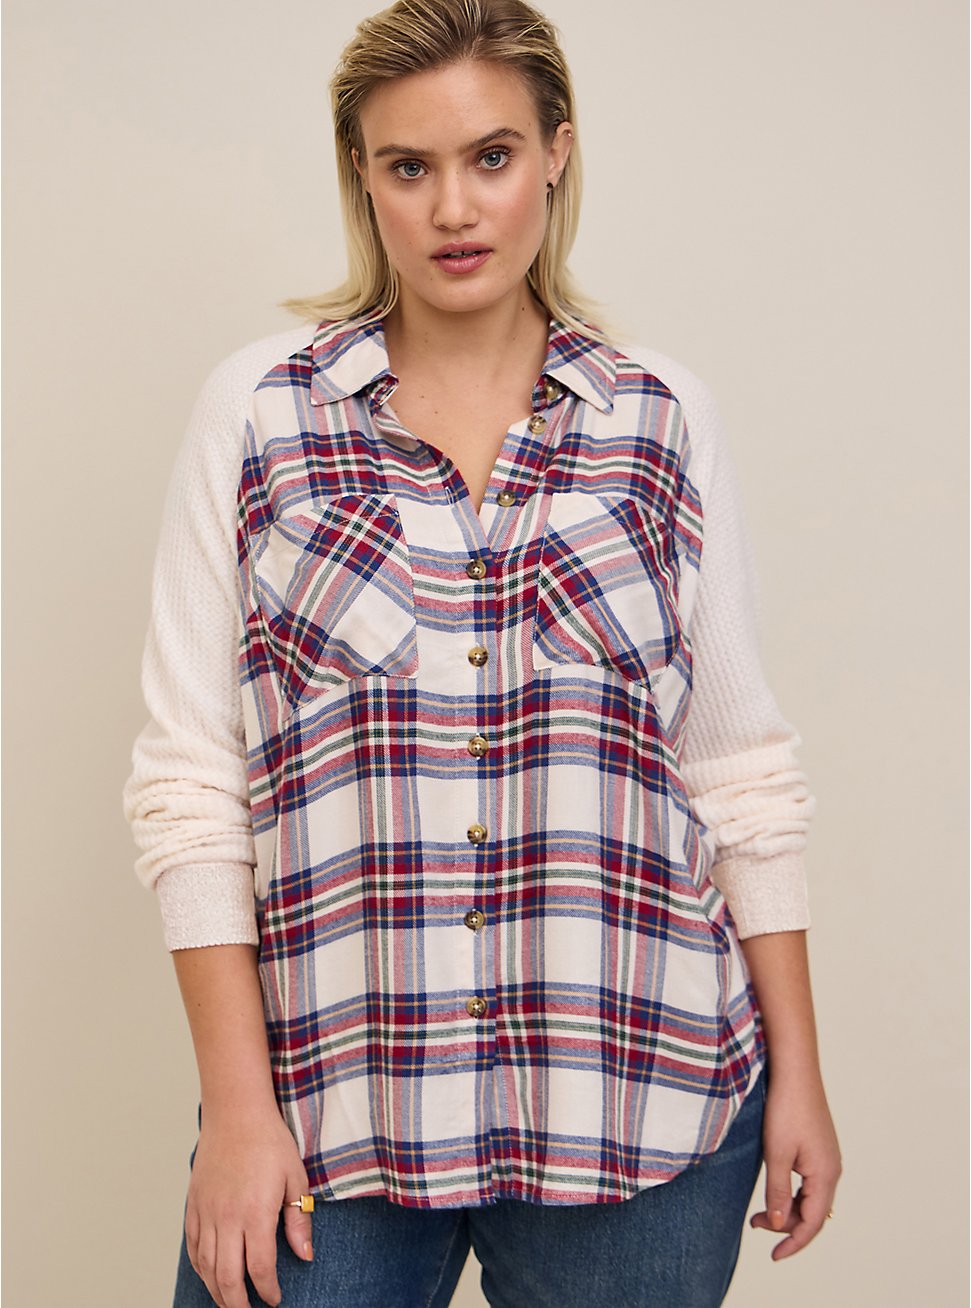 Plus Size Relaxed Fit Brushed Rayon Acrylic With Waffle Knit Sleeve Shirt, PLAID IVORY, hi-res